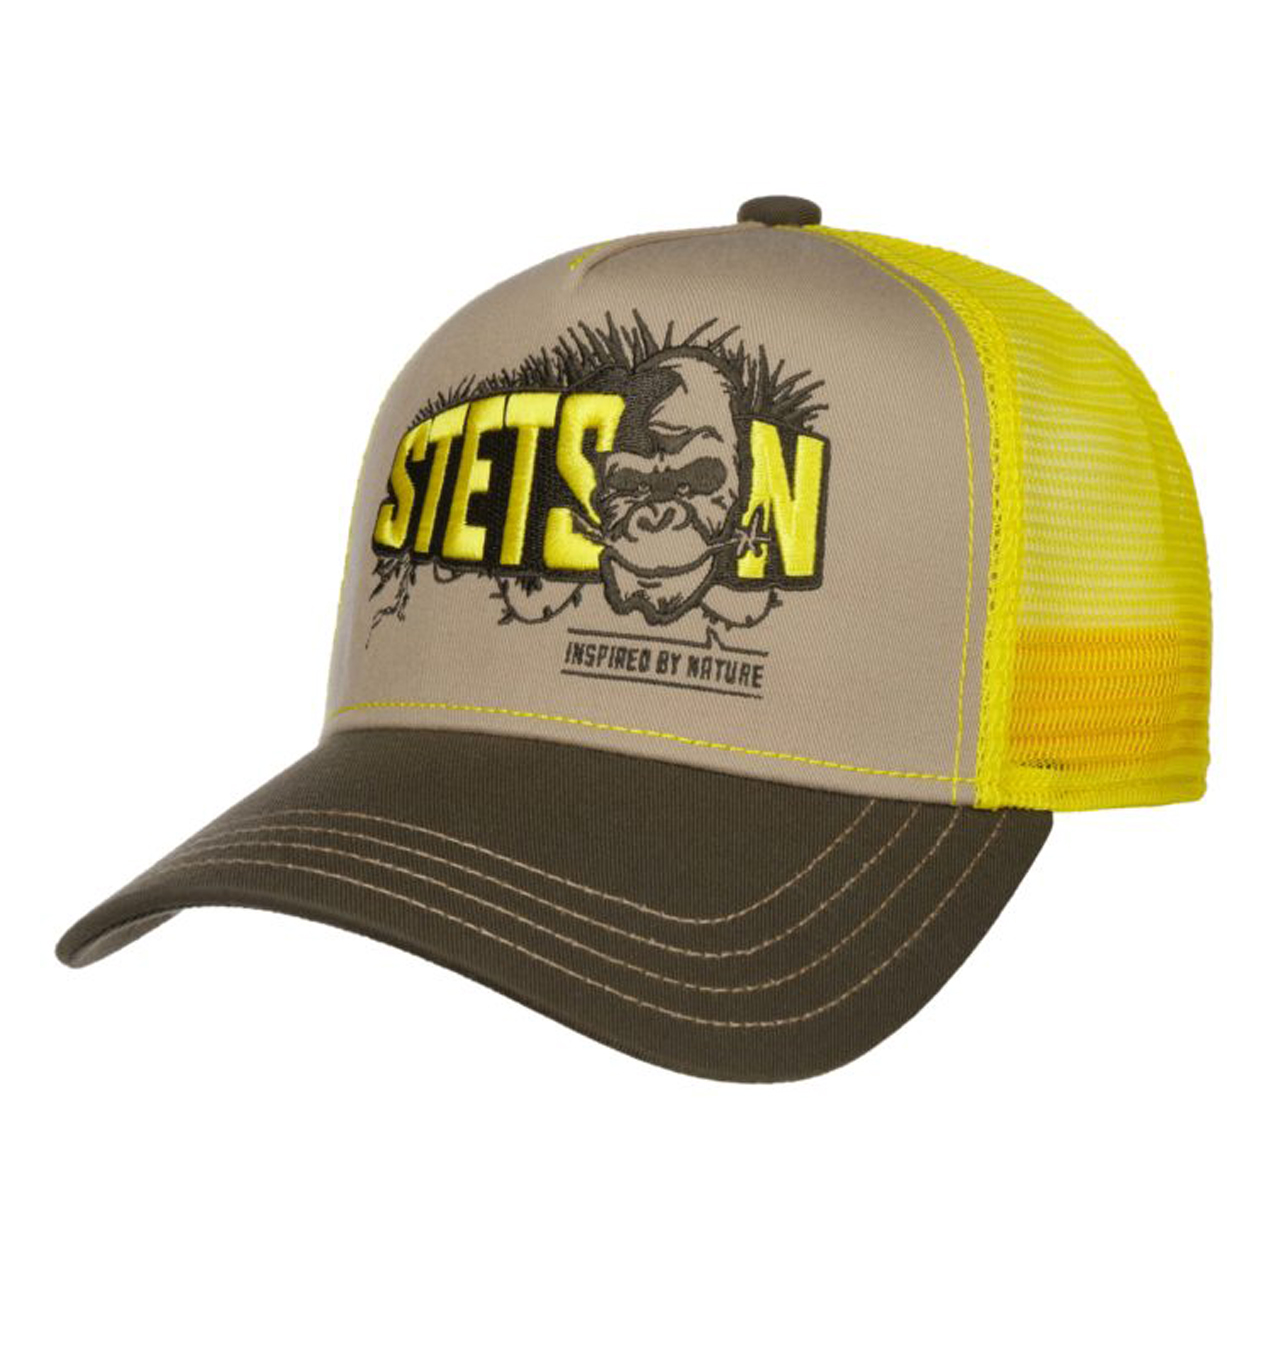 Stetson---Ape-Inspired-By-Nature---Yellow-Grey1